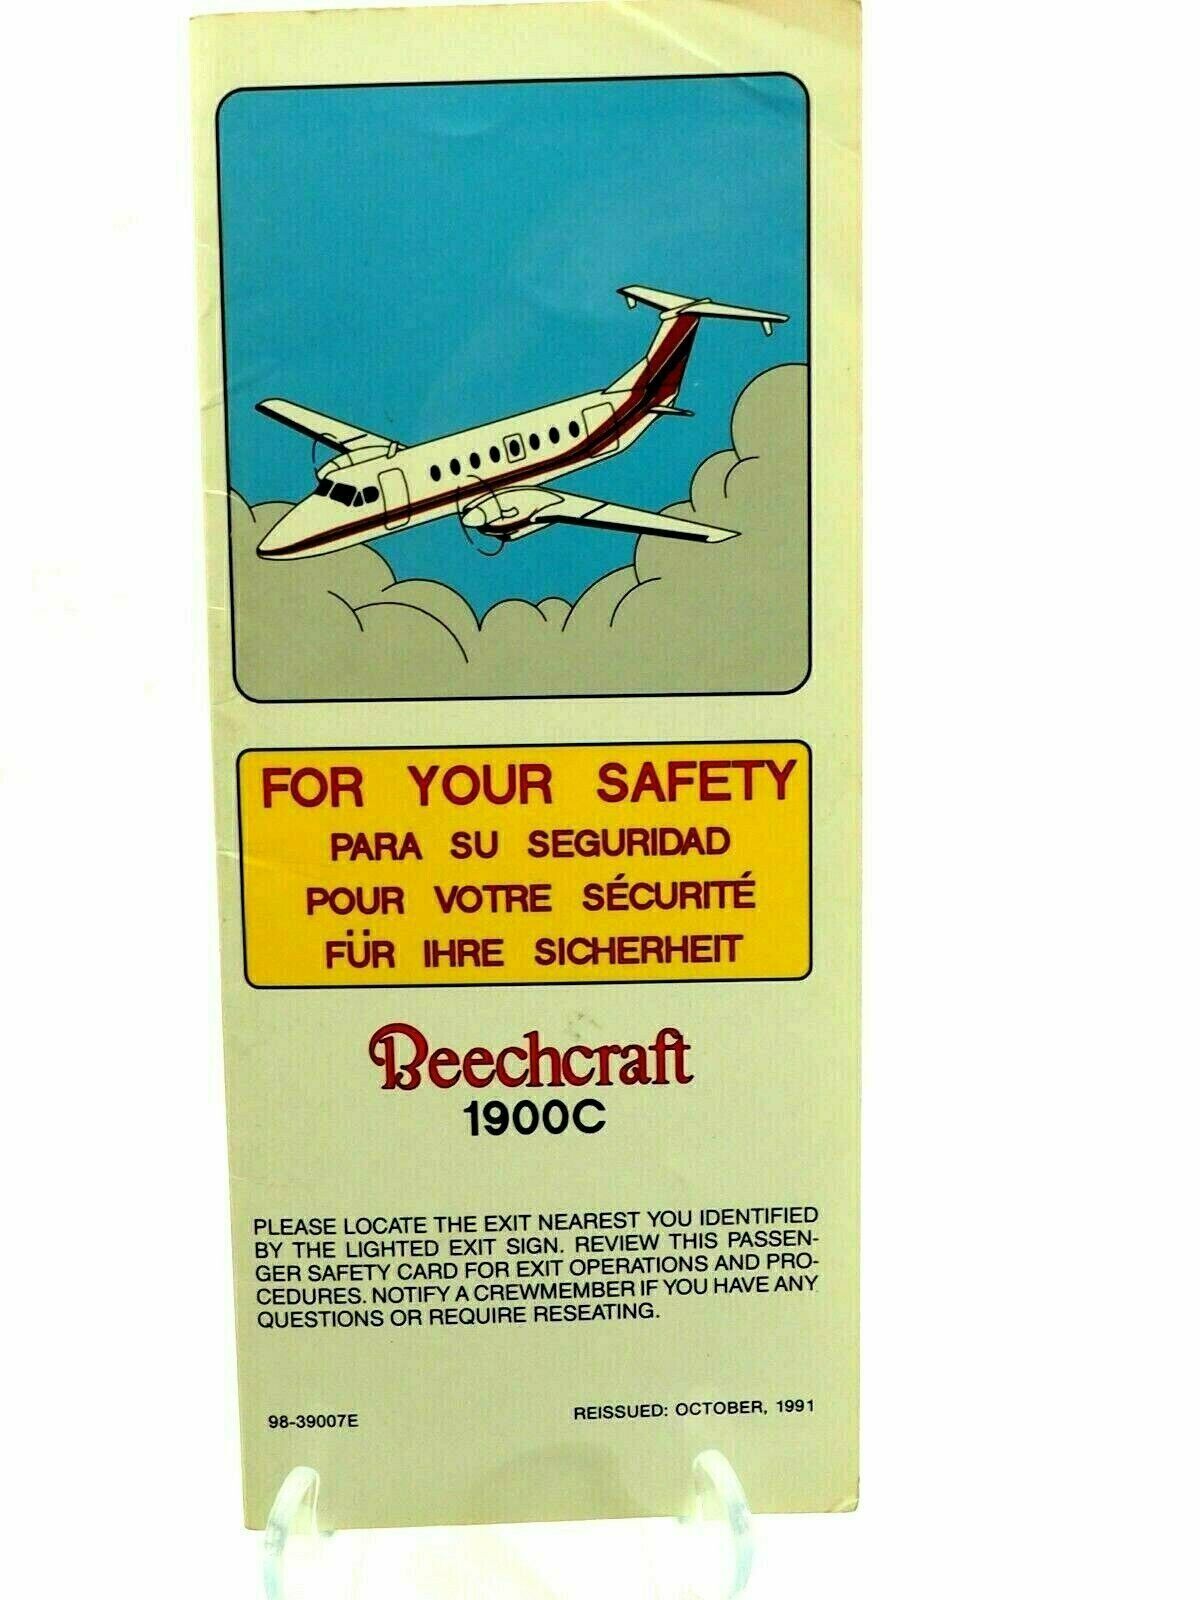 Beechcraft Manufactures 1900C updated 1991 issue seatback safety guide